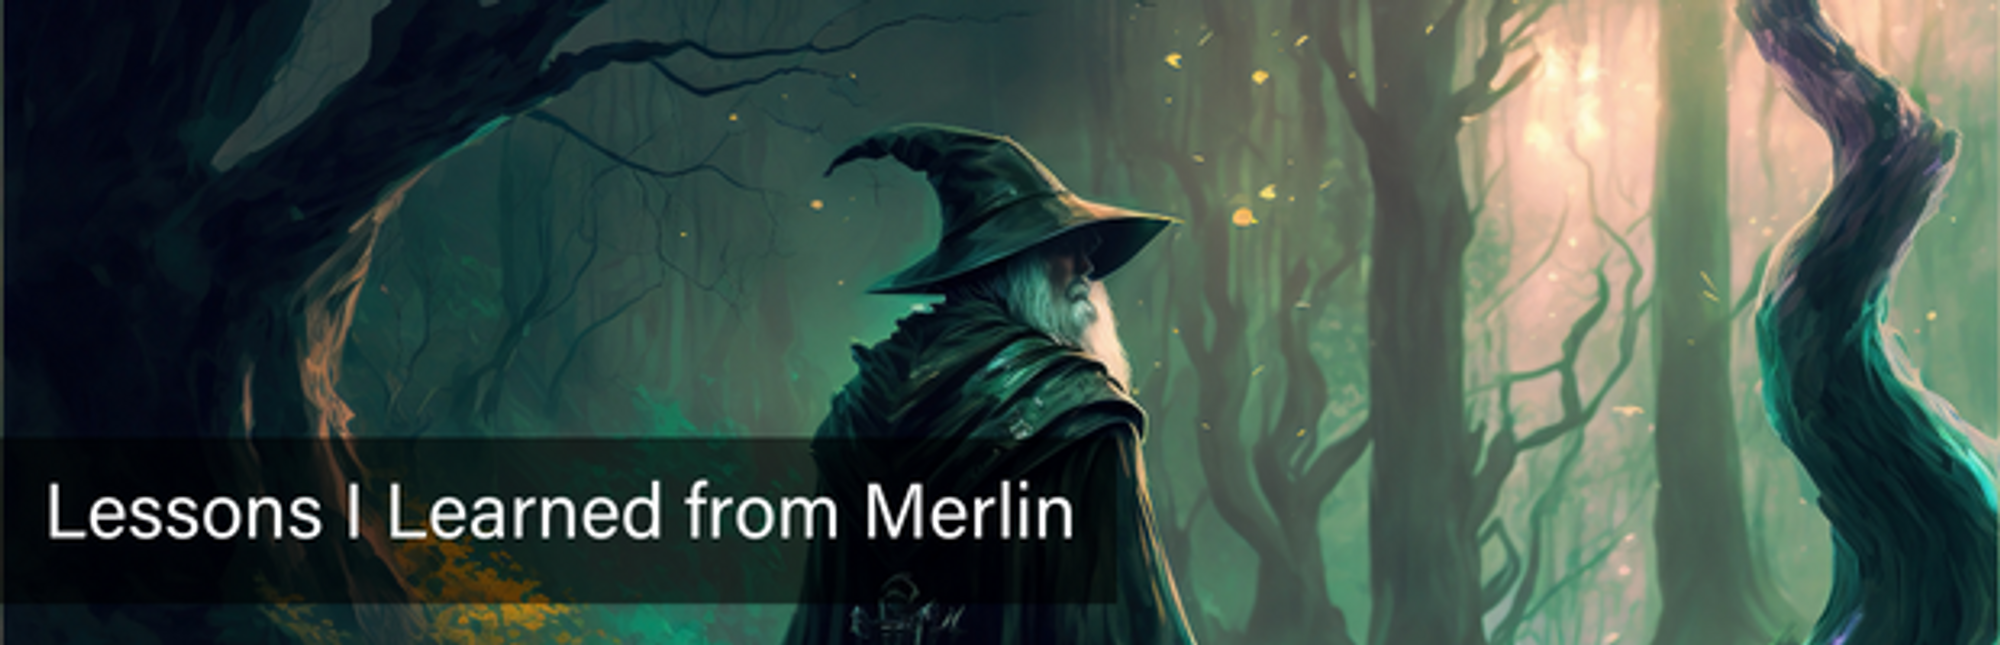 Wizard named Merlin walking through an animated forest.